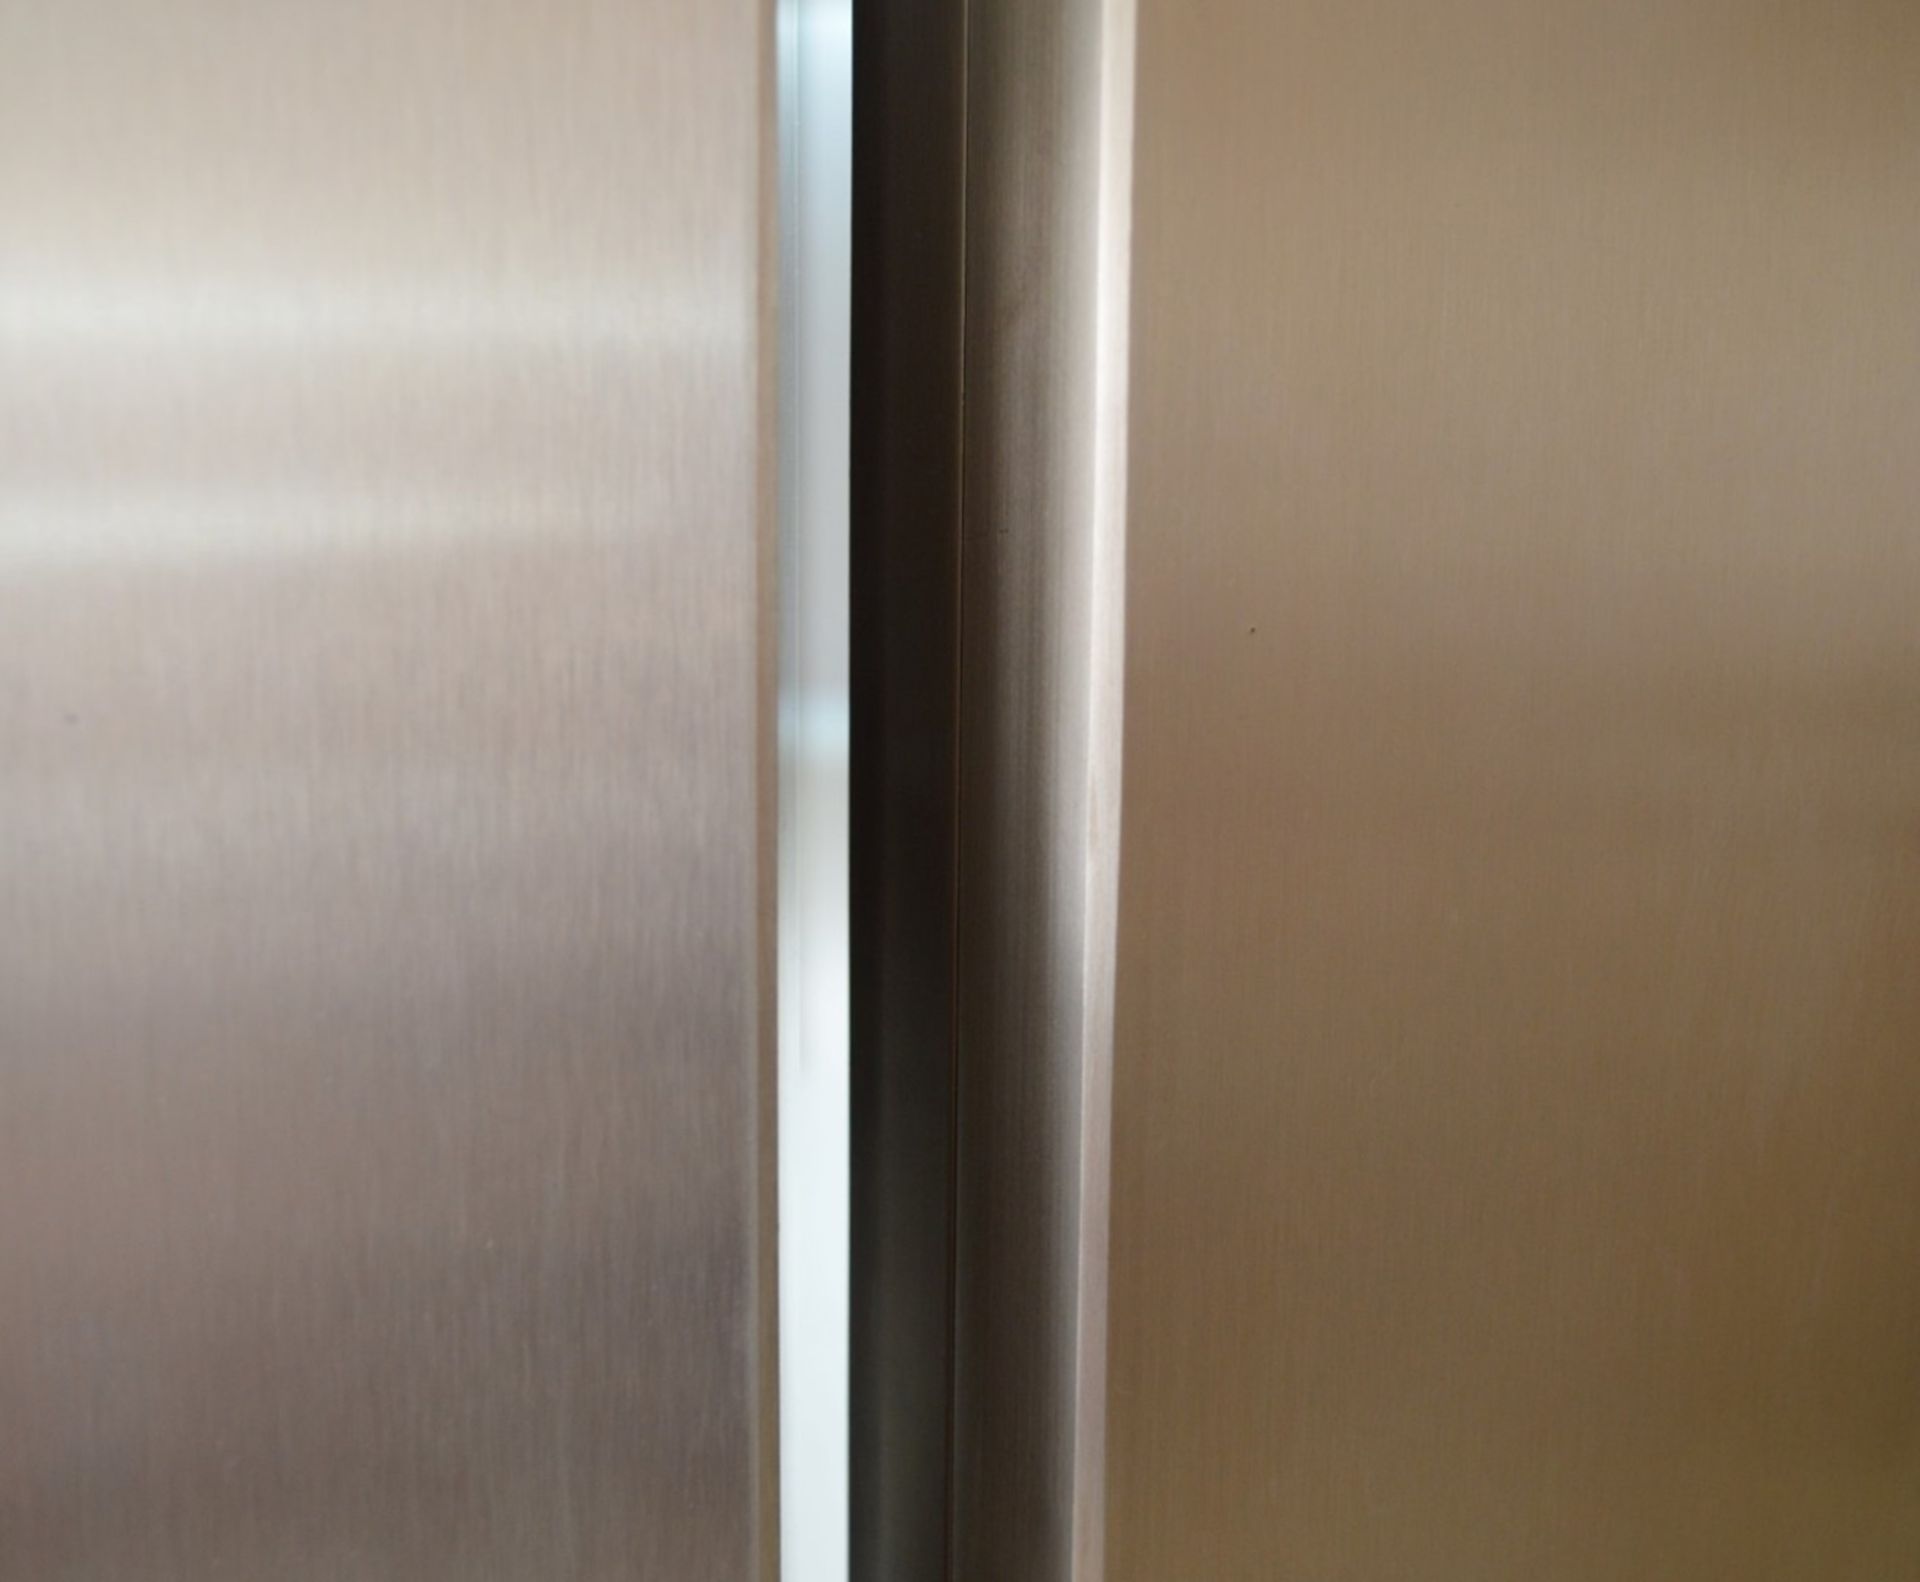 2 x Bespoke Internal Doors With Stainless Steel Finish - Pair of - Large Size - Ideal For Interior - Image 4 of 9